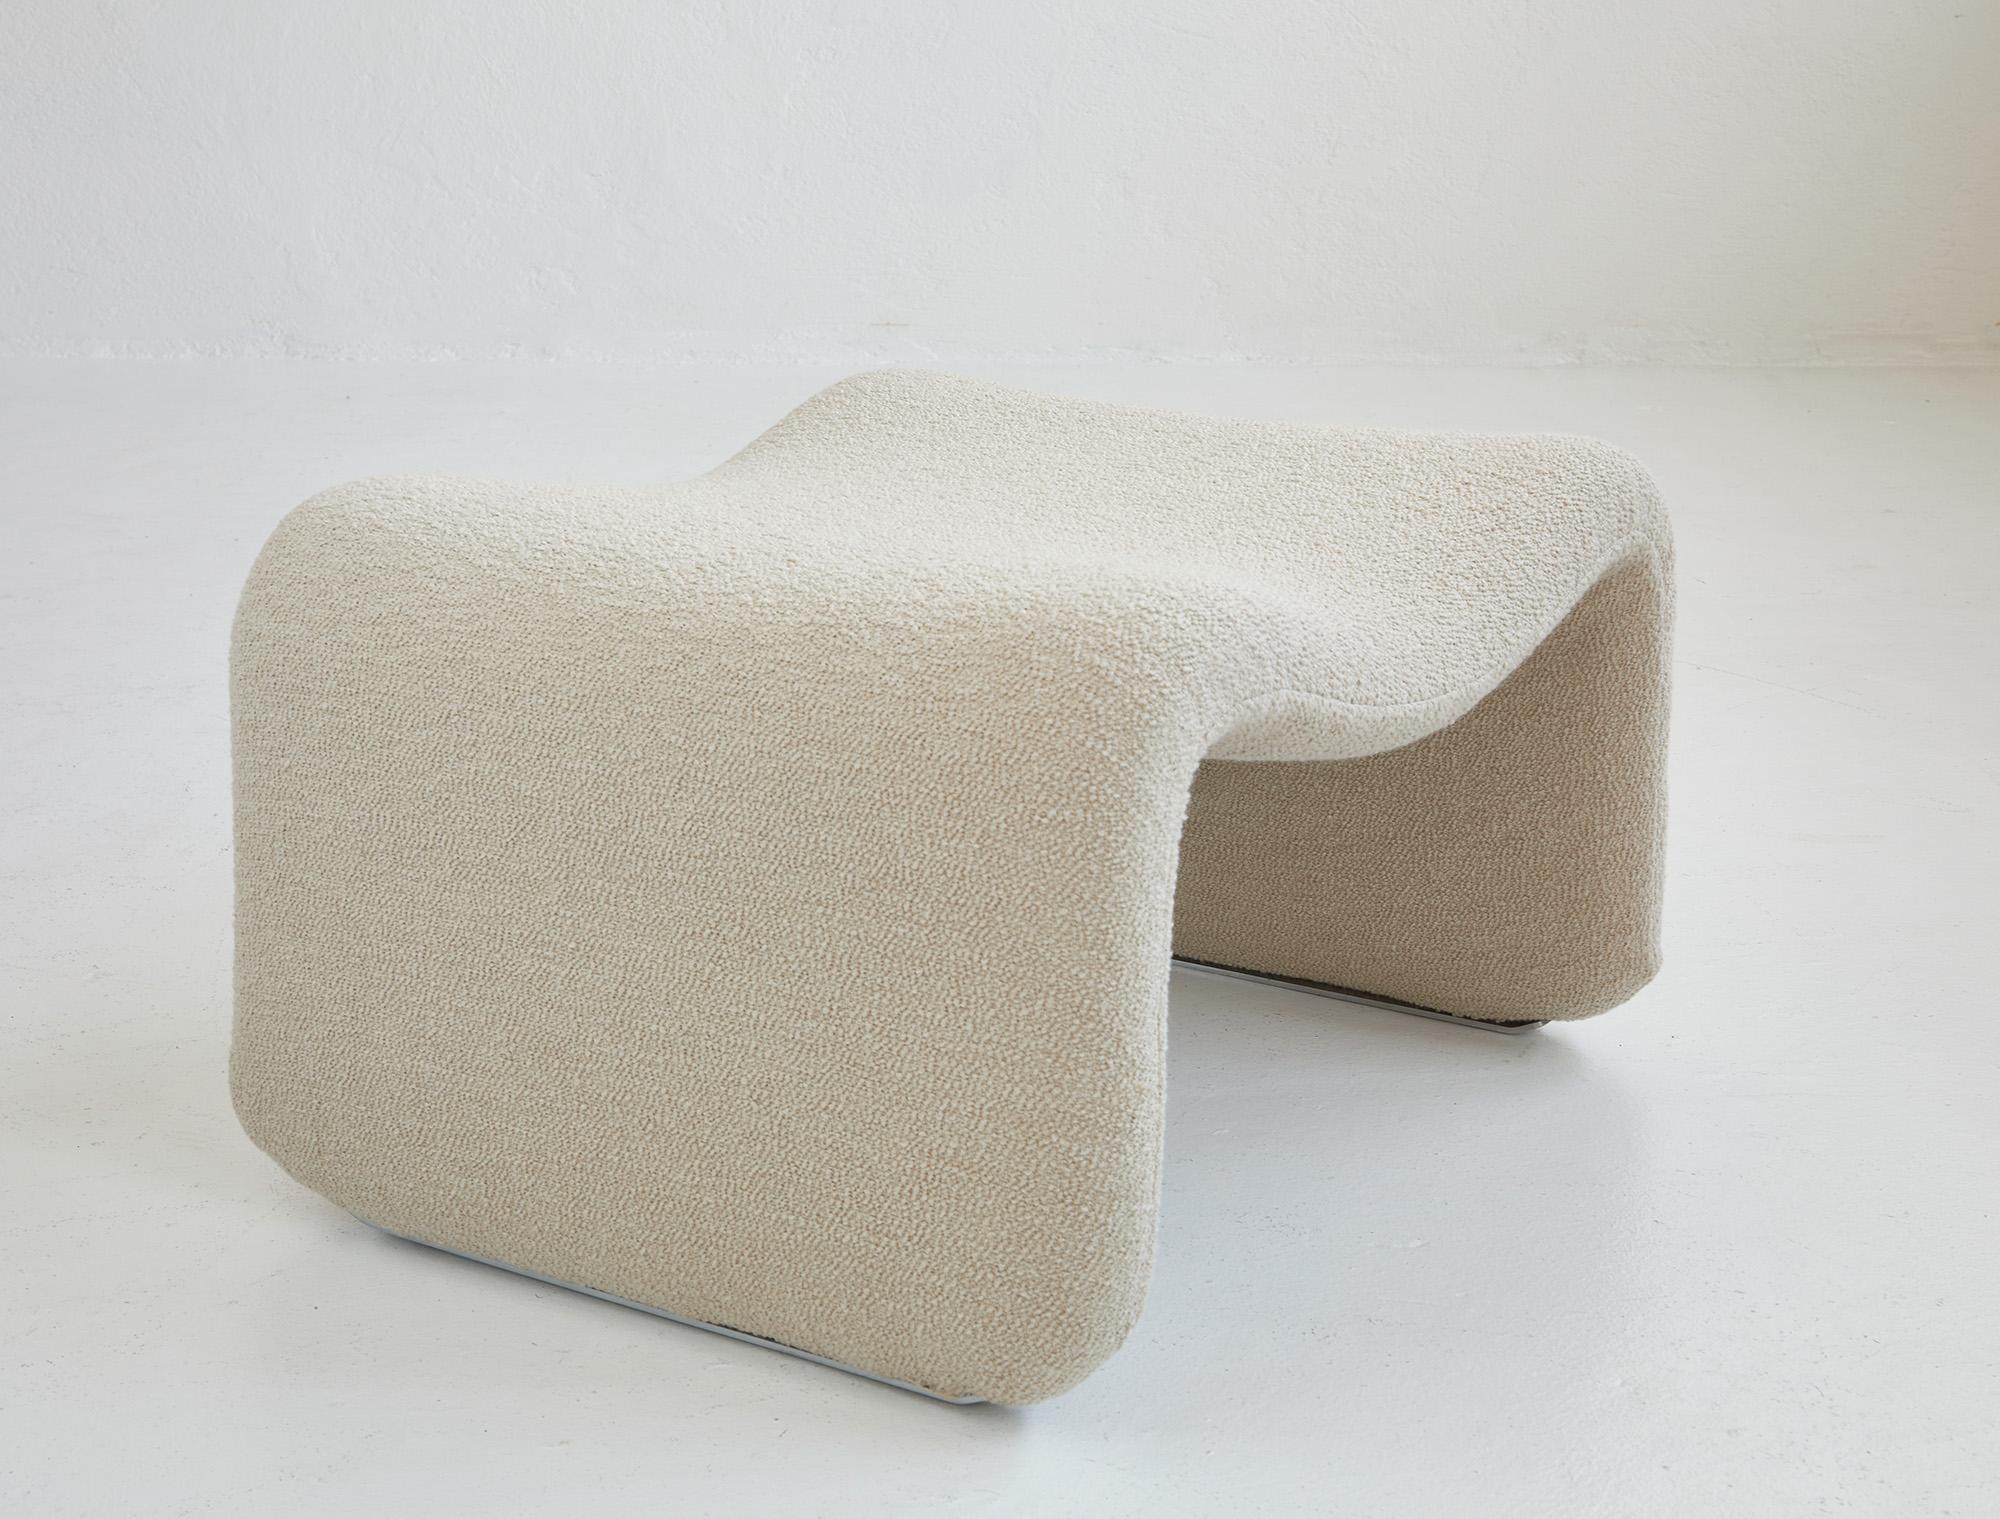  'Djinn' stool by Olivier Mourgue for Airborne international, France 1964-1965. 

Professionally reupholstered and foam replaced according to the original specifications and dimensions with a high-quality and cozy 